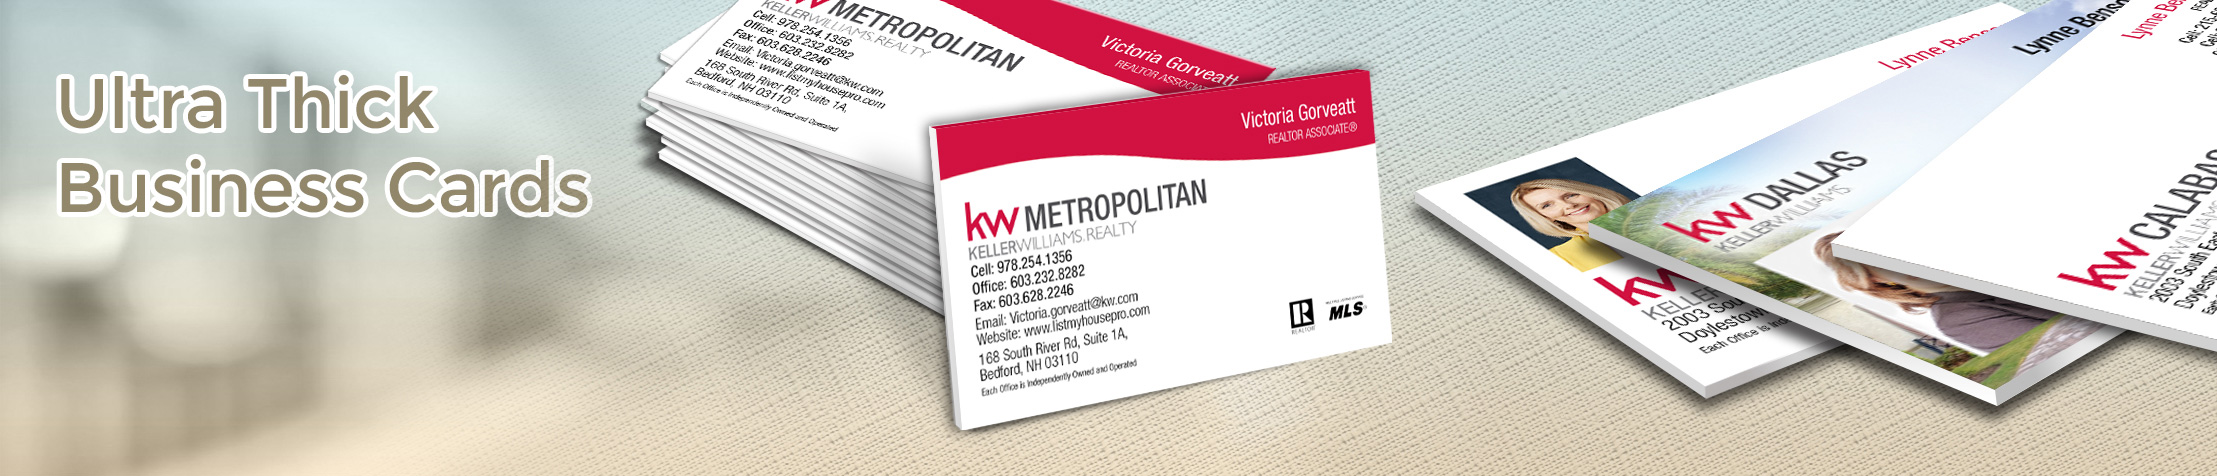 Keller Williams Real Estate Ultra Thick Business Cards - KW Approved Vendor - Luxury, Thick Stock Business Cards with a Matte Finish for Realtors | BestPrintBuy.com